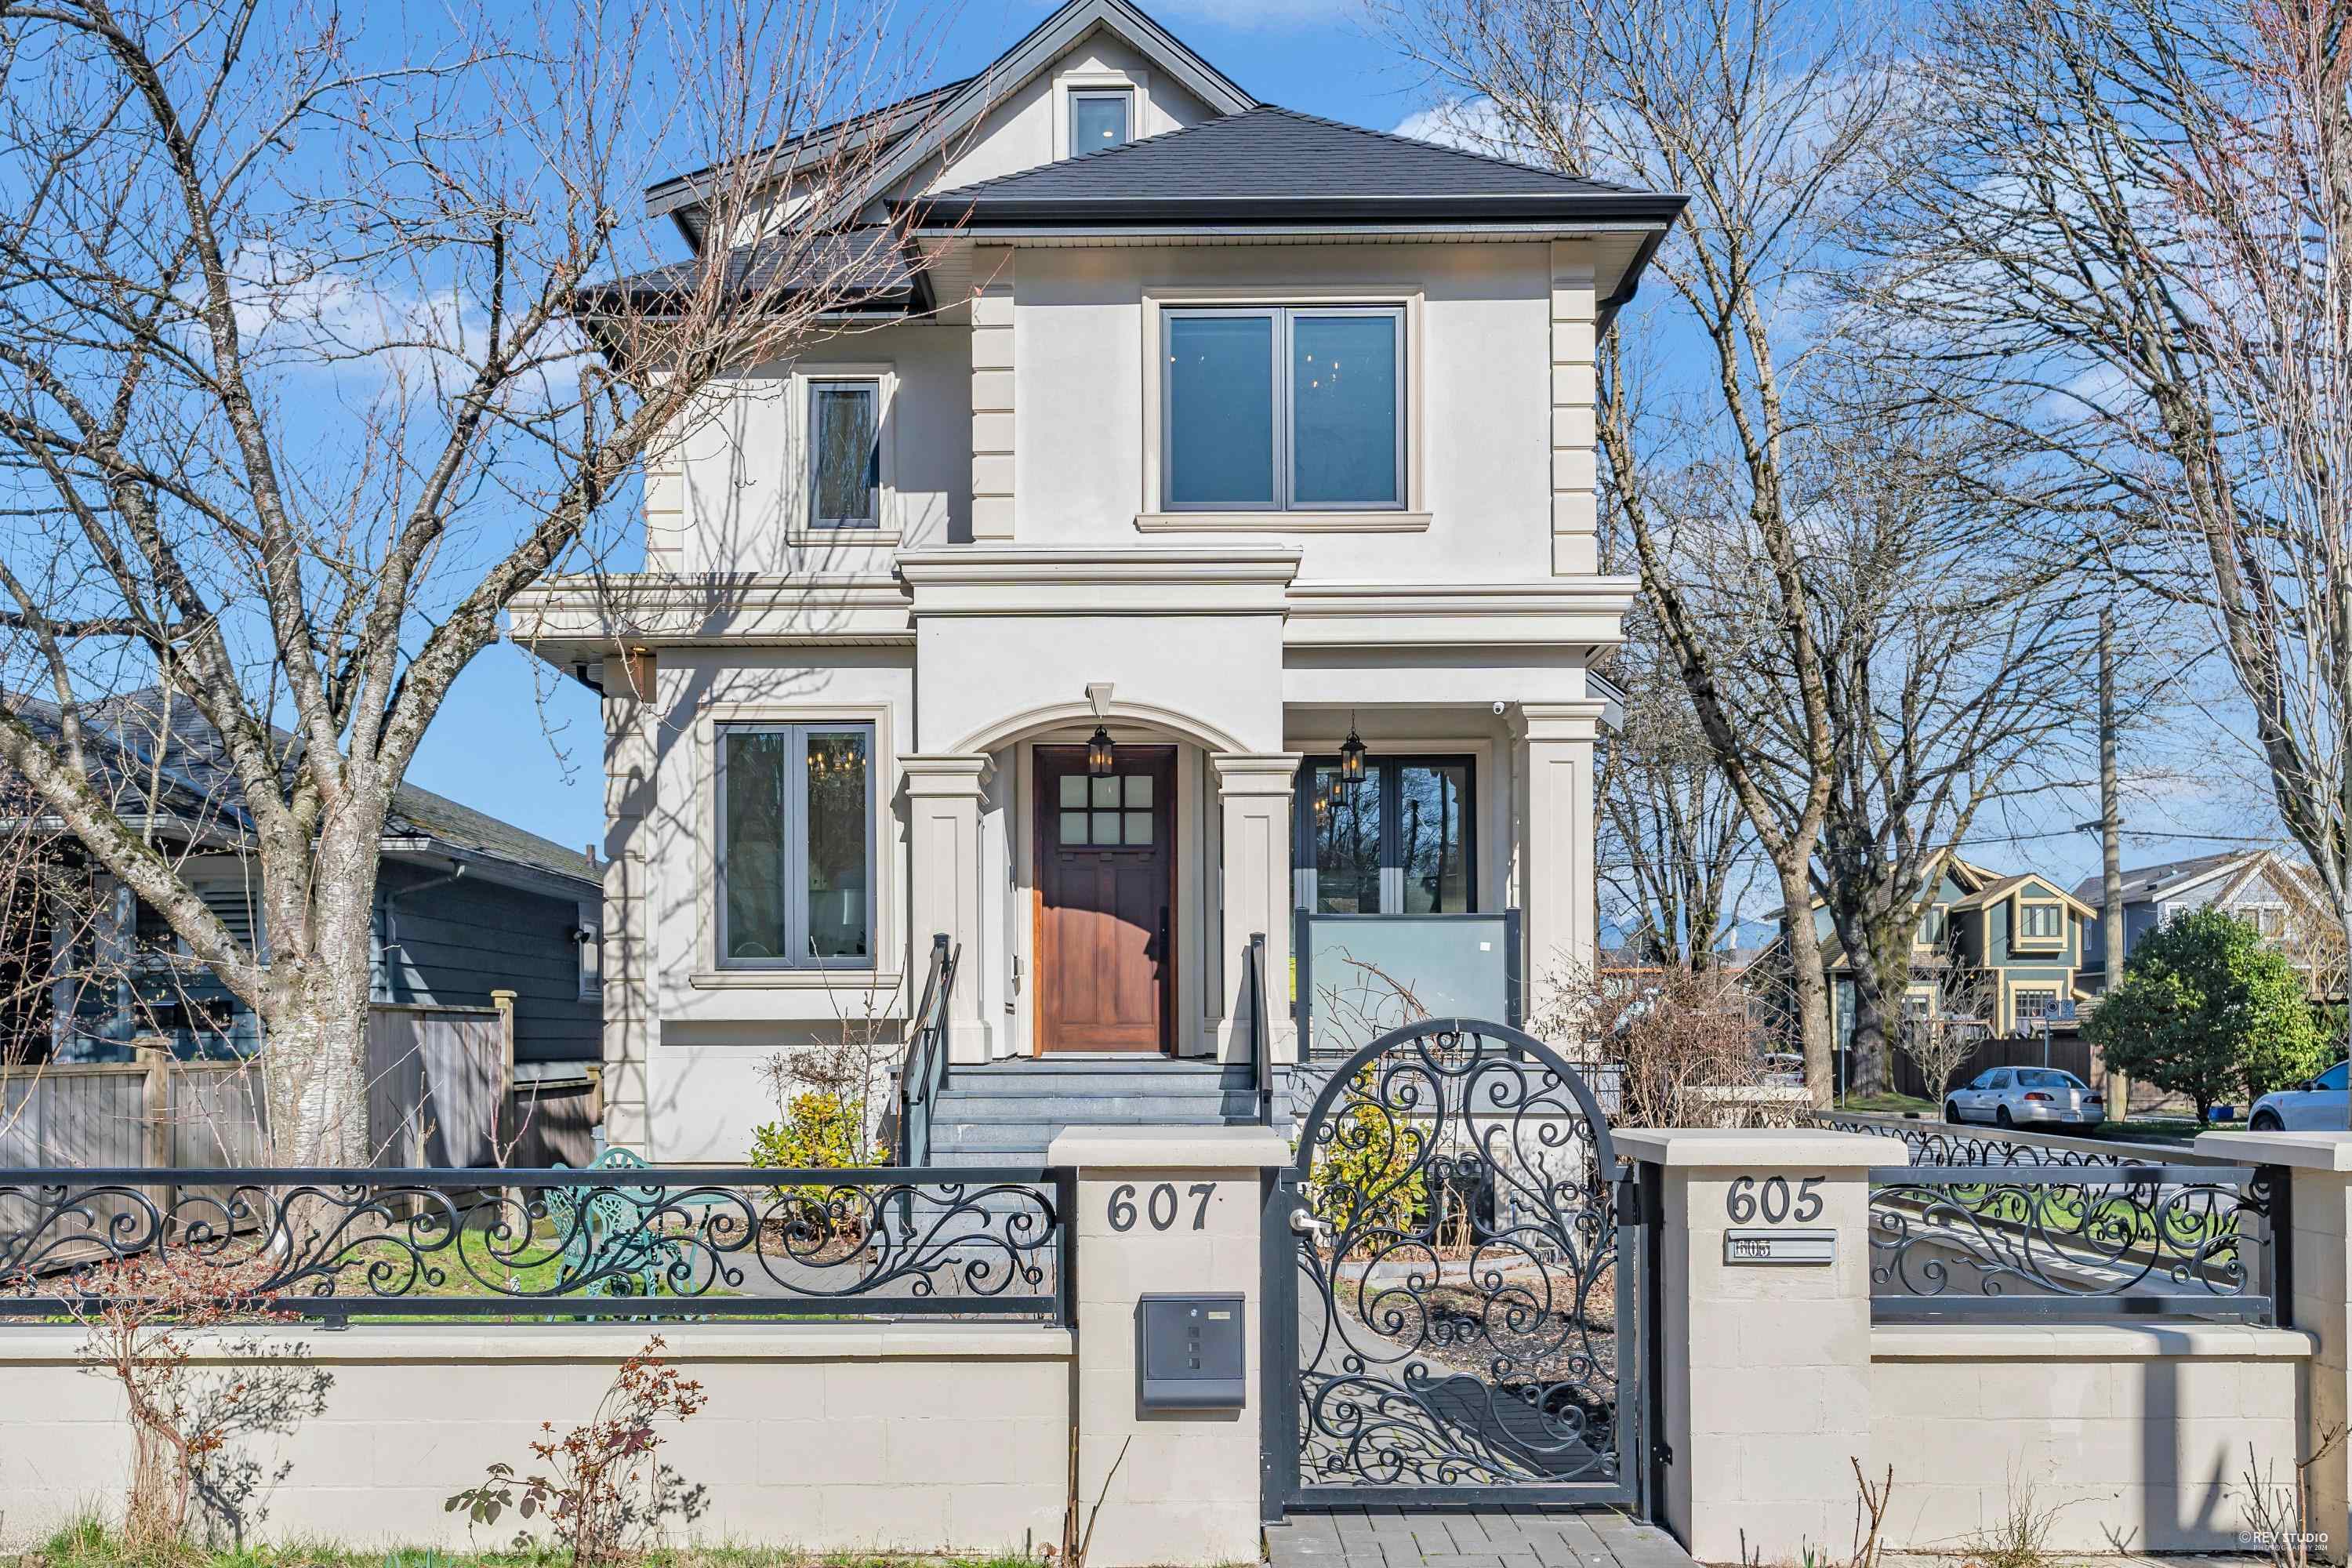 Listing image of 605 W 23RD AVENUE